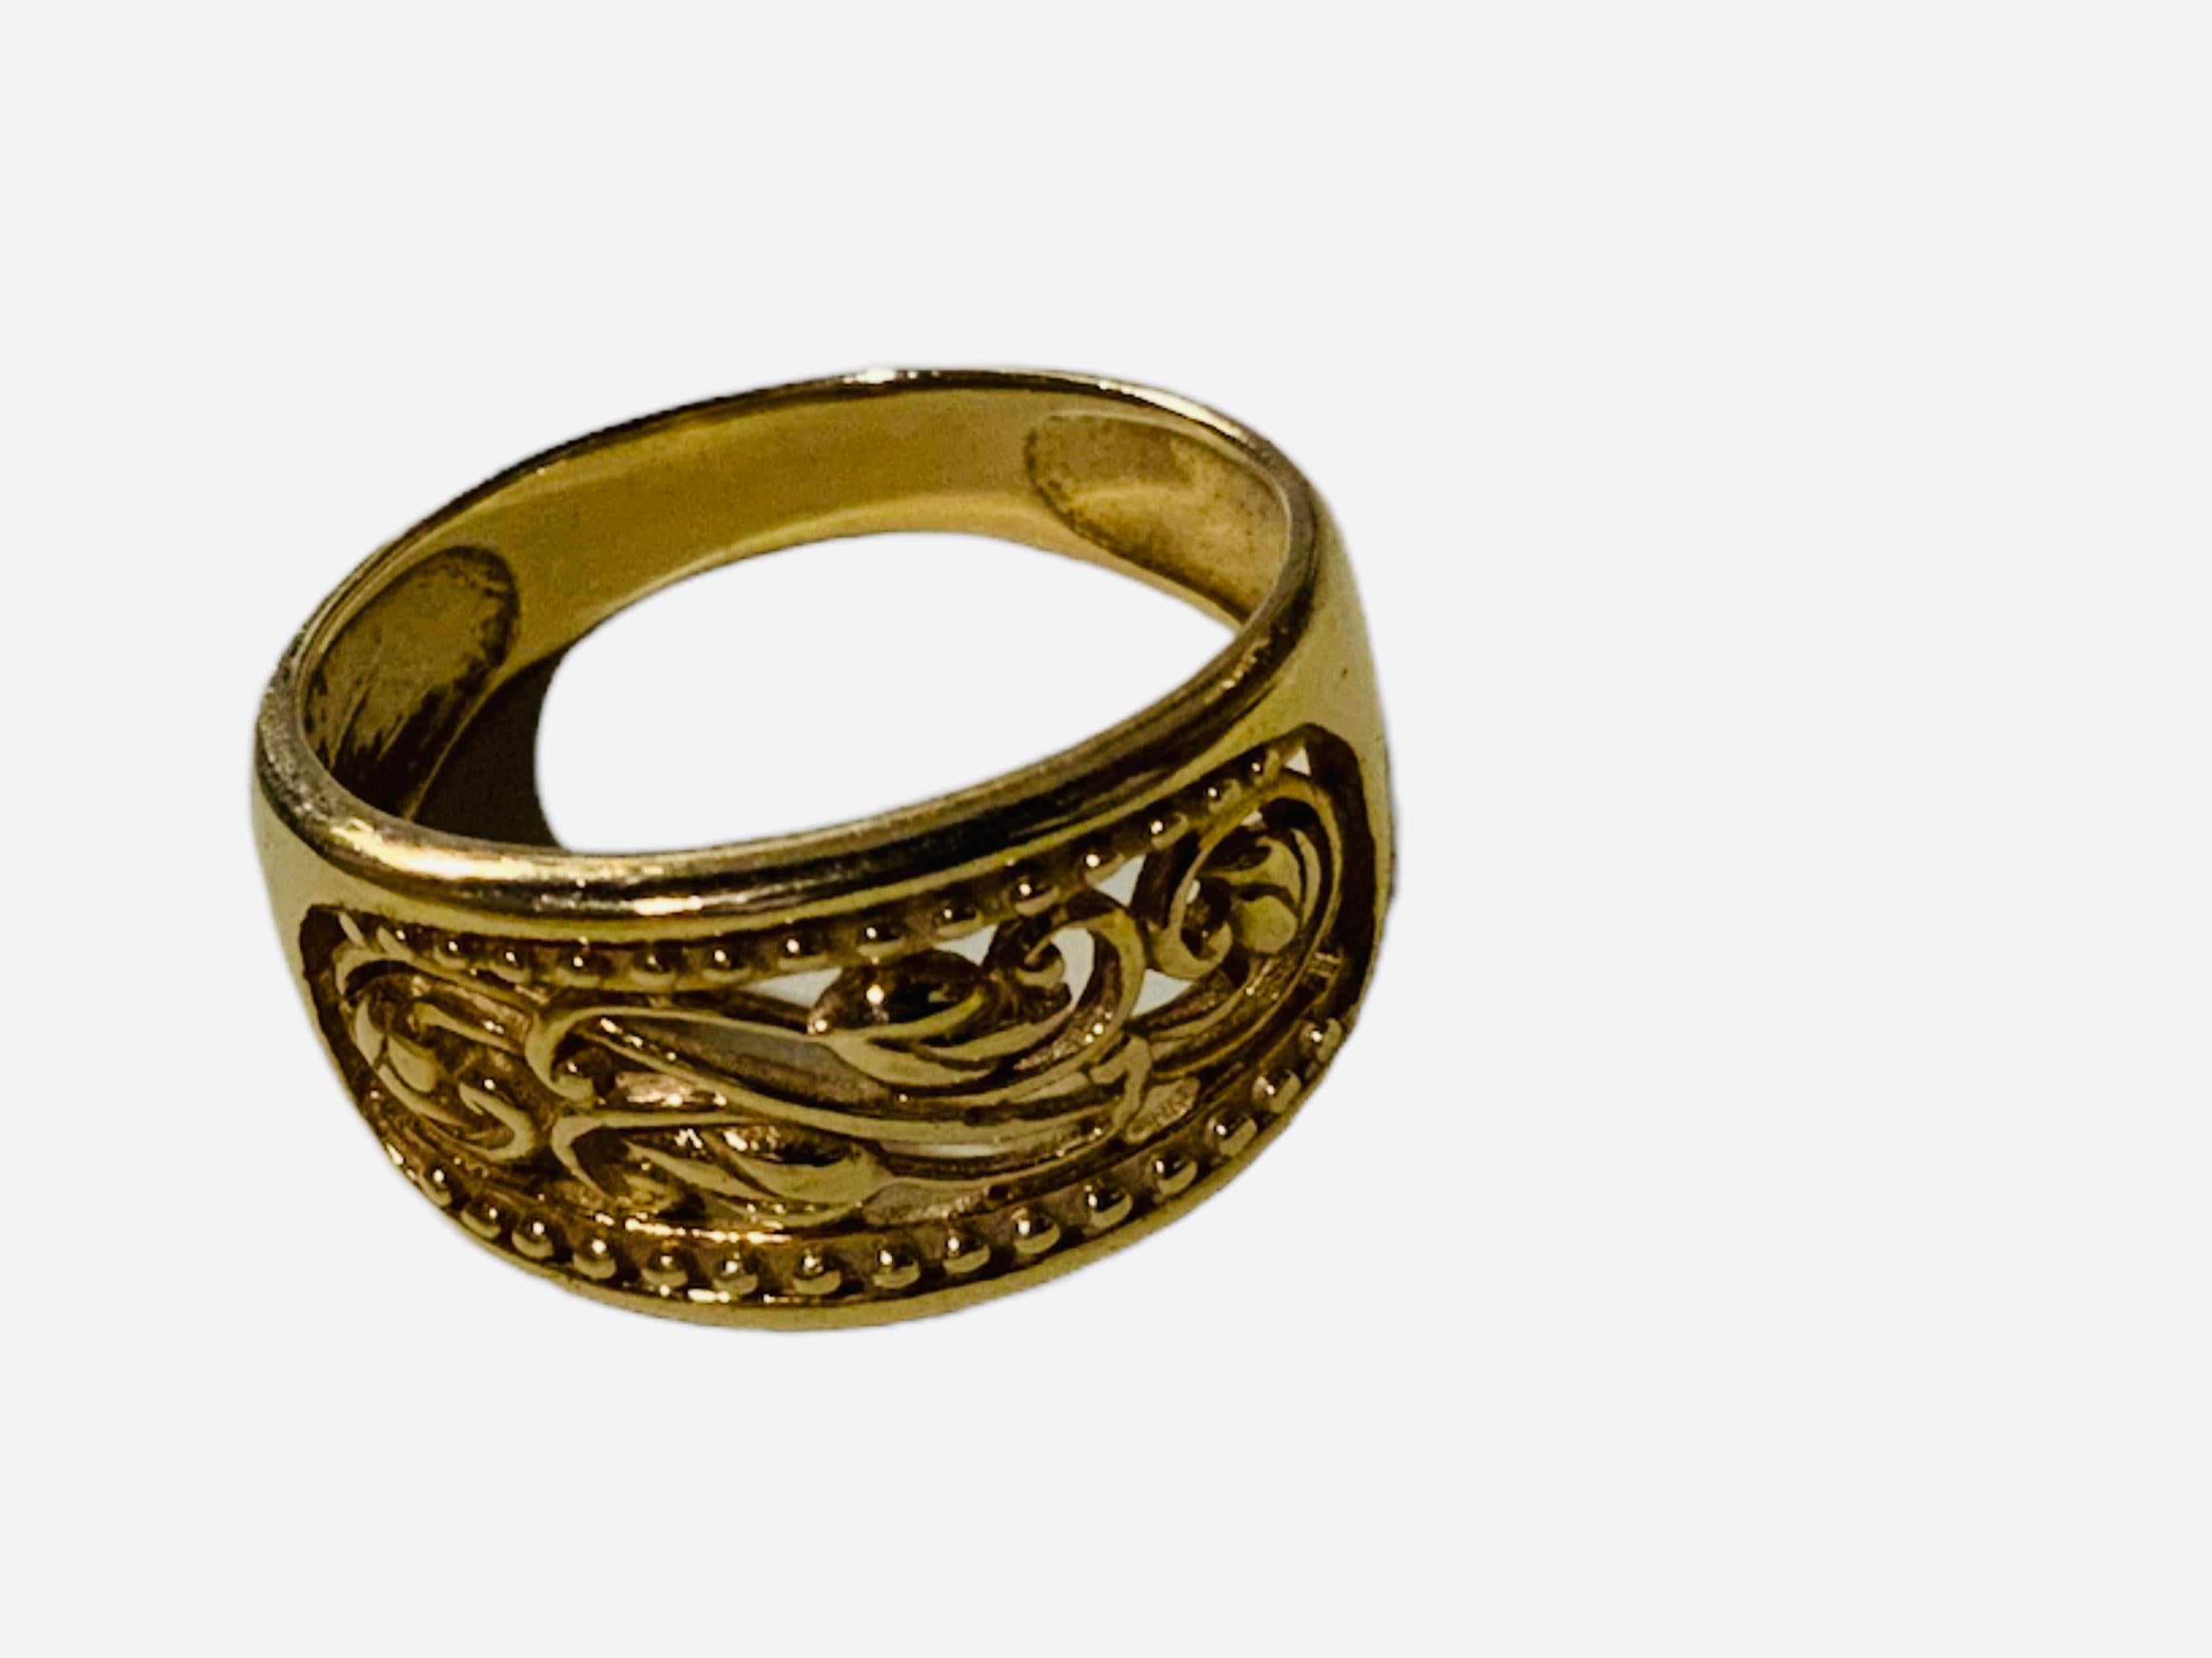 This is an 18K gold ring made in Turkey. It depicts a wide band with a pierced longitudinal center that is adorned with few scrolls of floral branches and some beads in line framed them. The ring is hallmarked AK, Turkey and 18K.